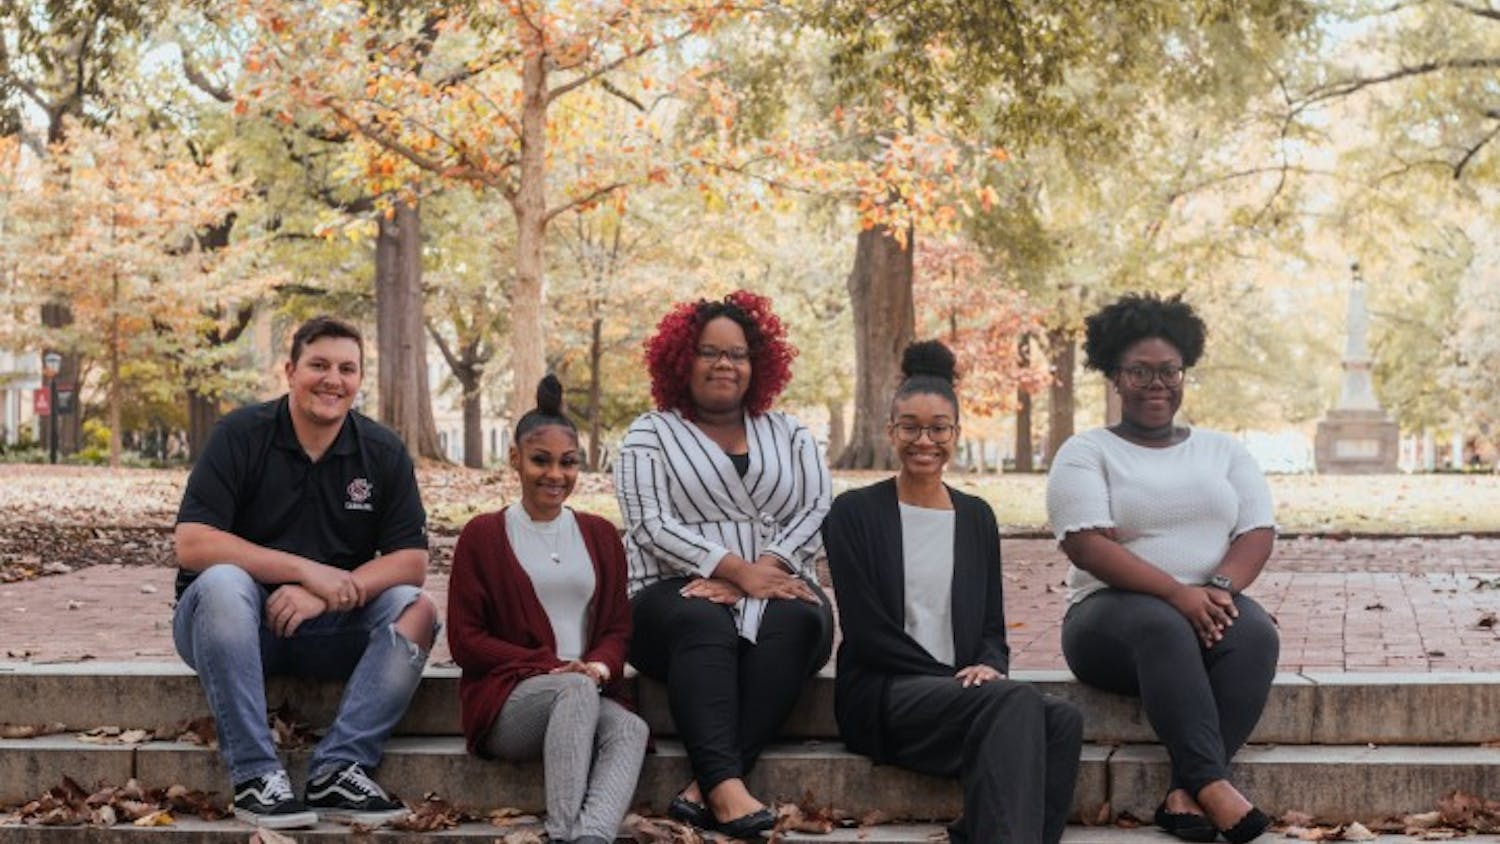 From left to right: Bradley Barker, A'ya Hall, Alyssia Ross, Yaunna Hunter and Kailah Green pose for a photo at the Horseshoe. The group makes up a portion of the Association of Transfer Students, an organization that provides support and community for transfer students of all ages.